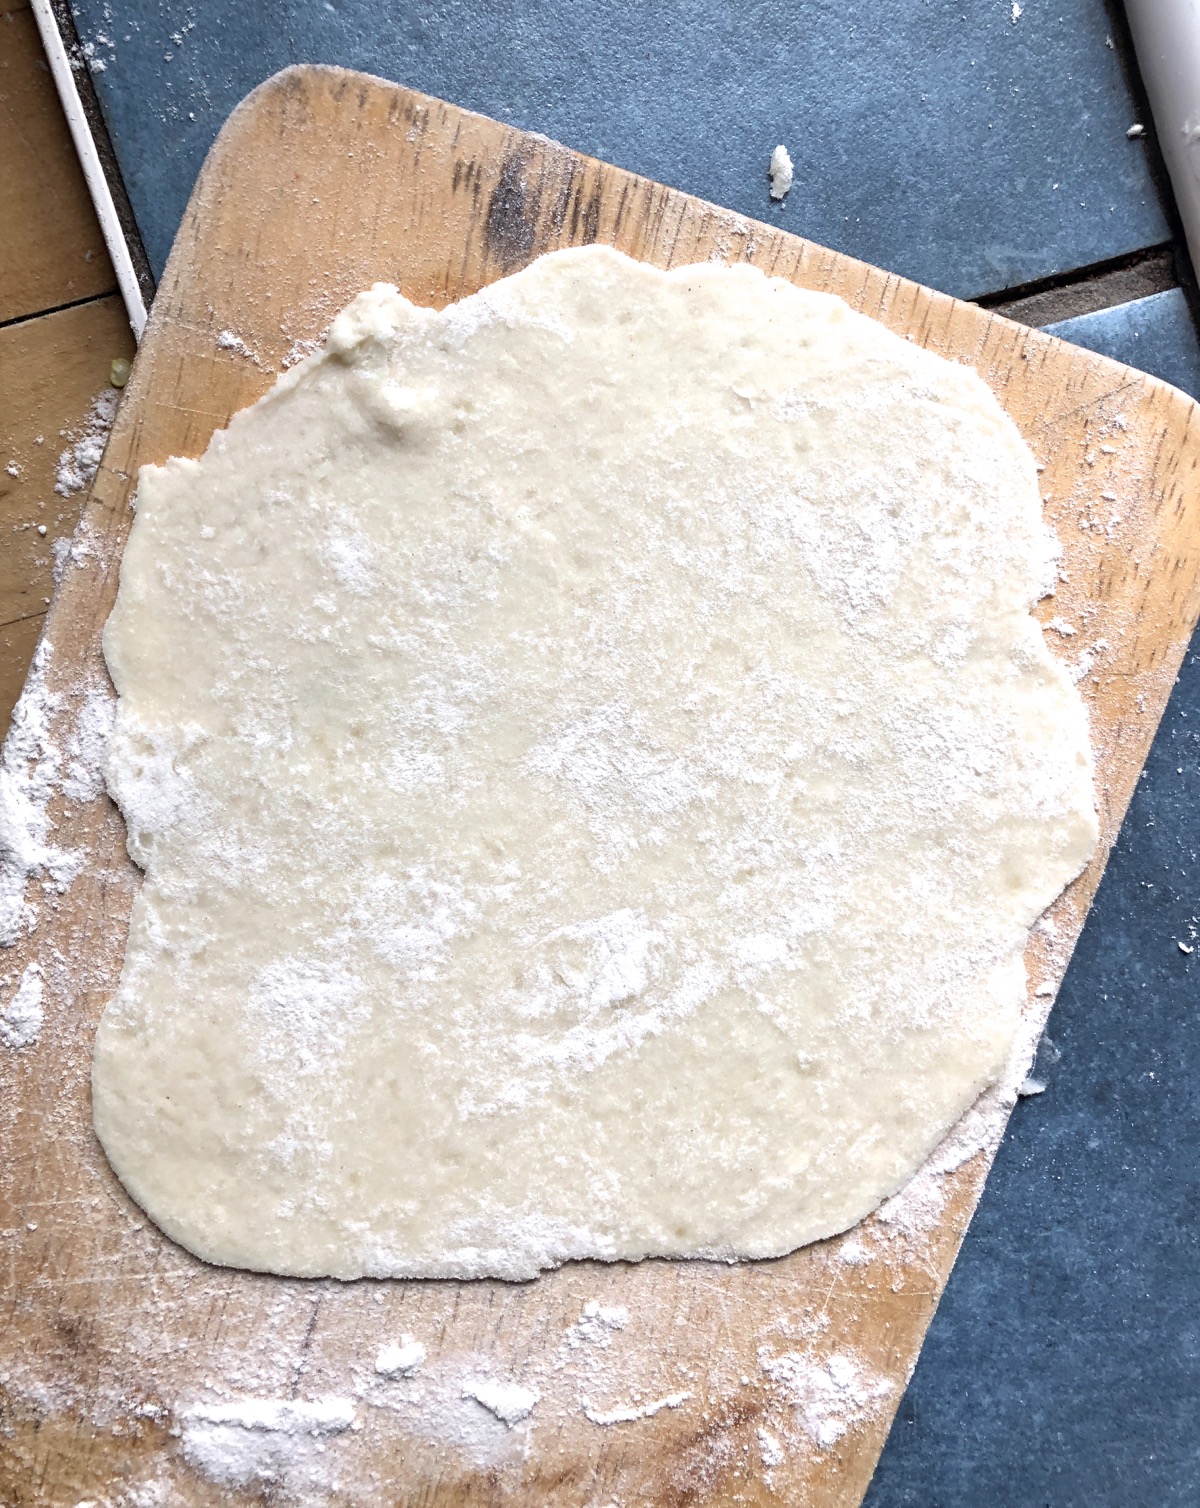 Rolled -out lefse on a floured cutting board, ready to transfer to a frying pan to cook.